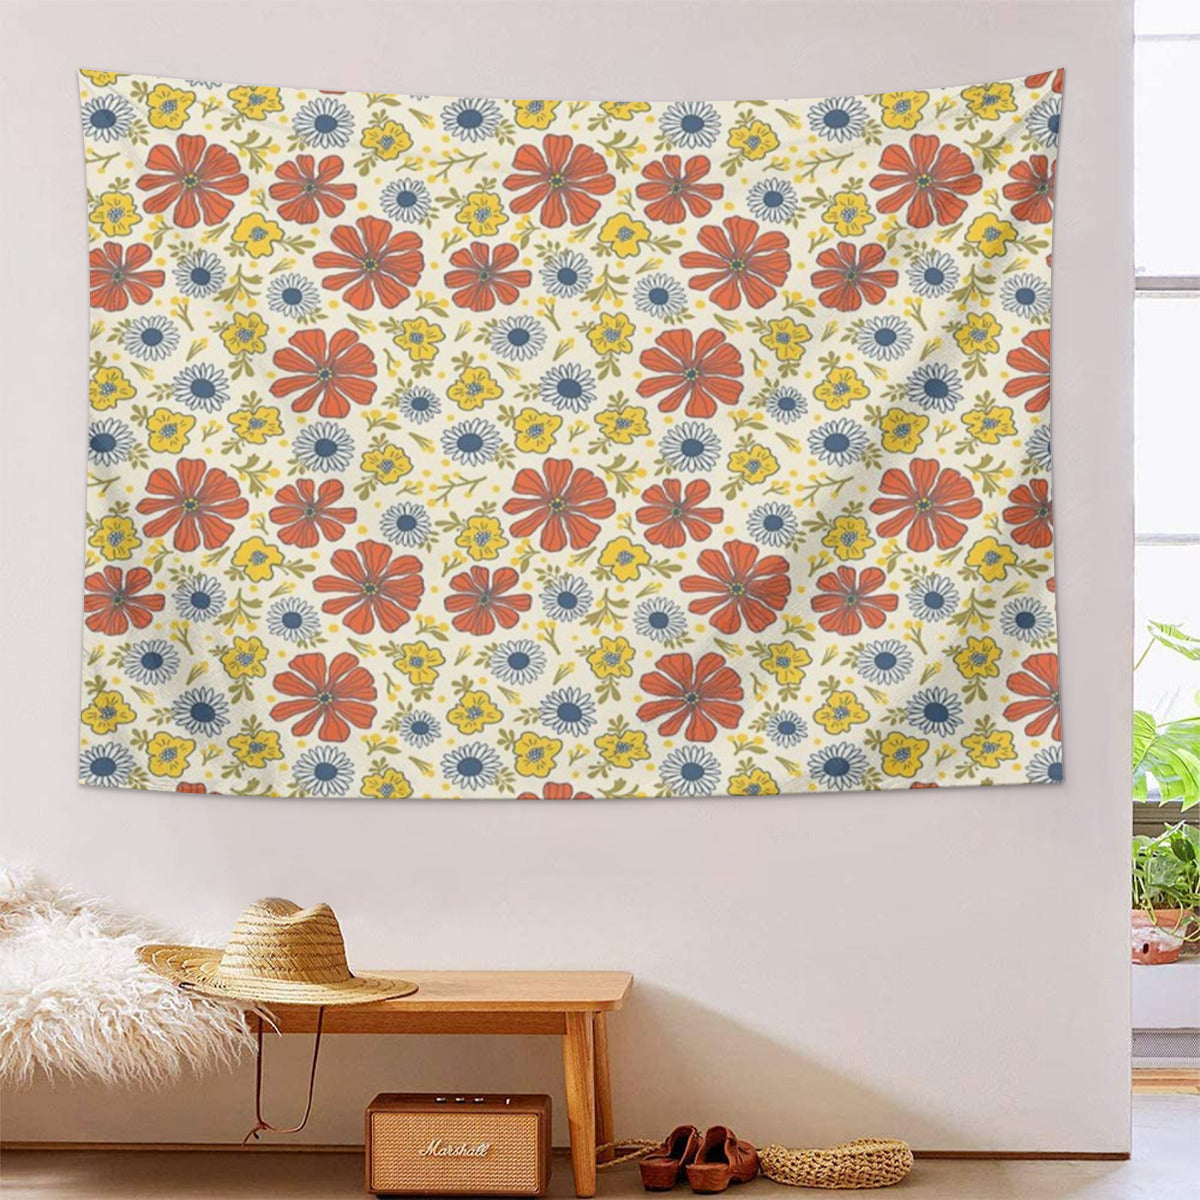 Your Granny Floral Wallpaper Tapestry